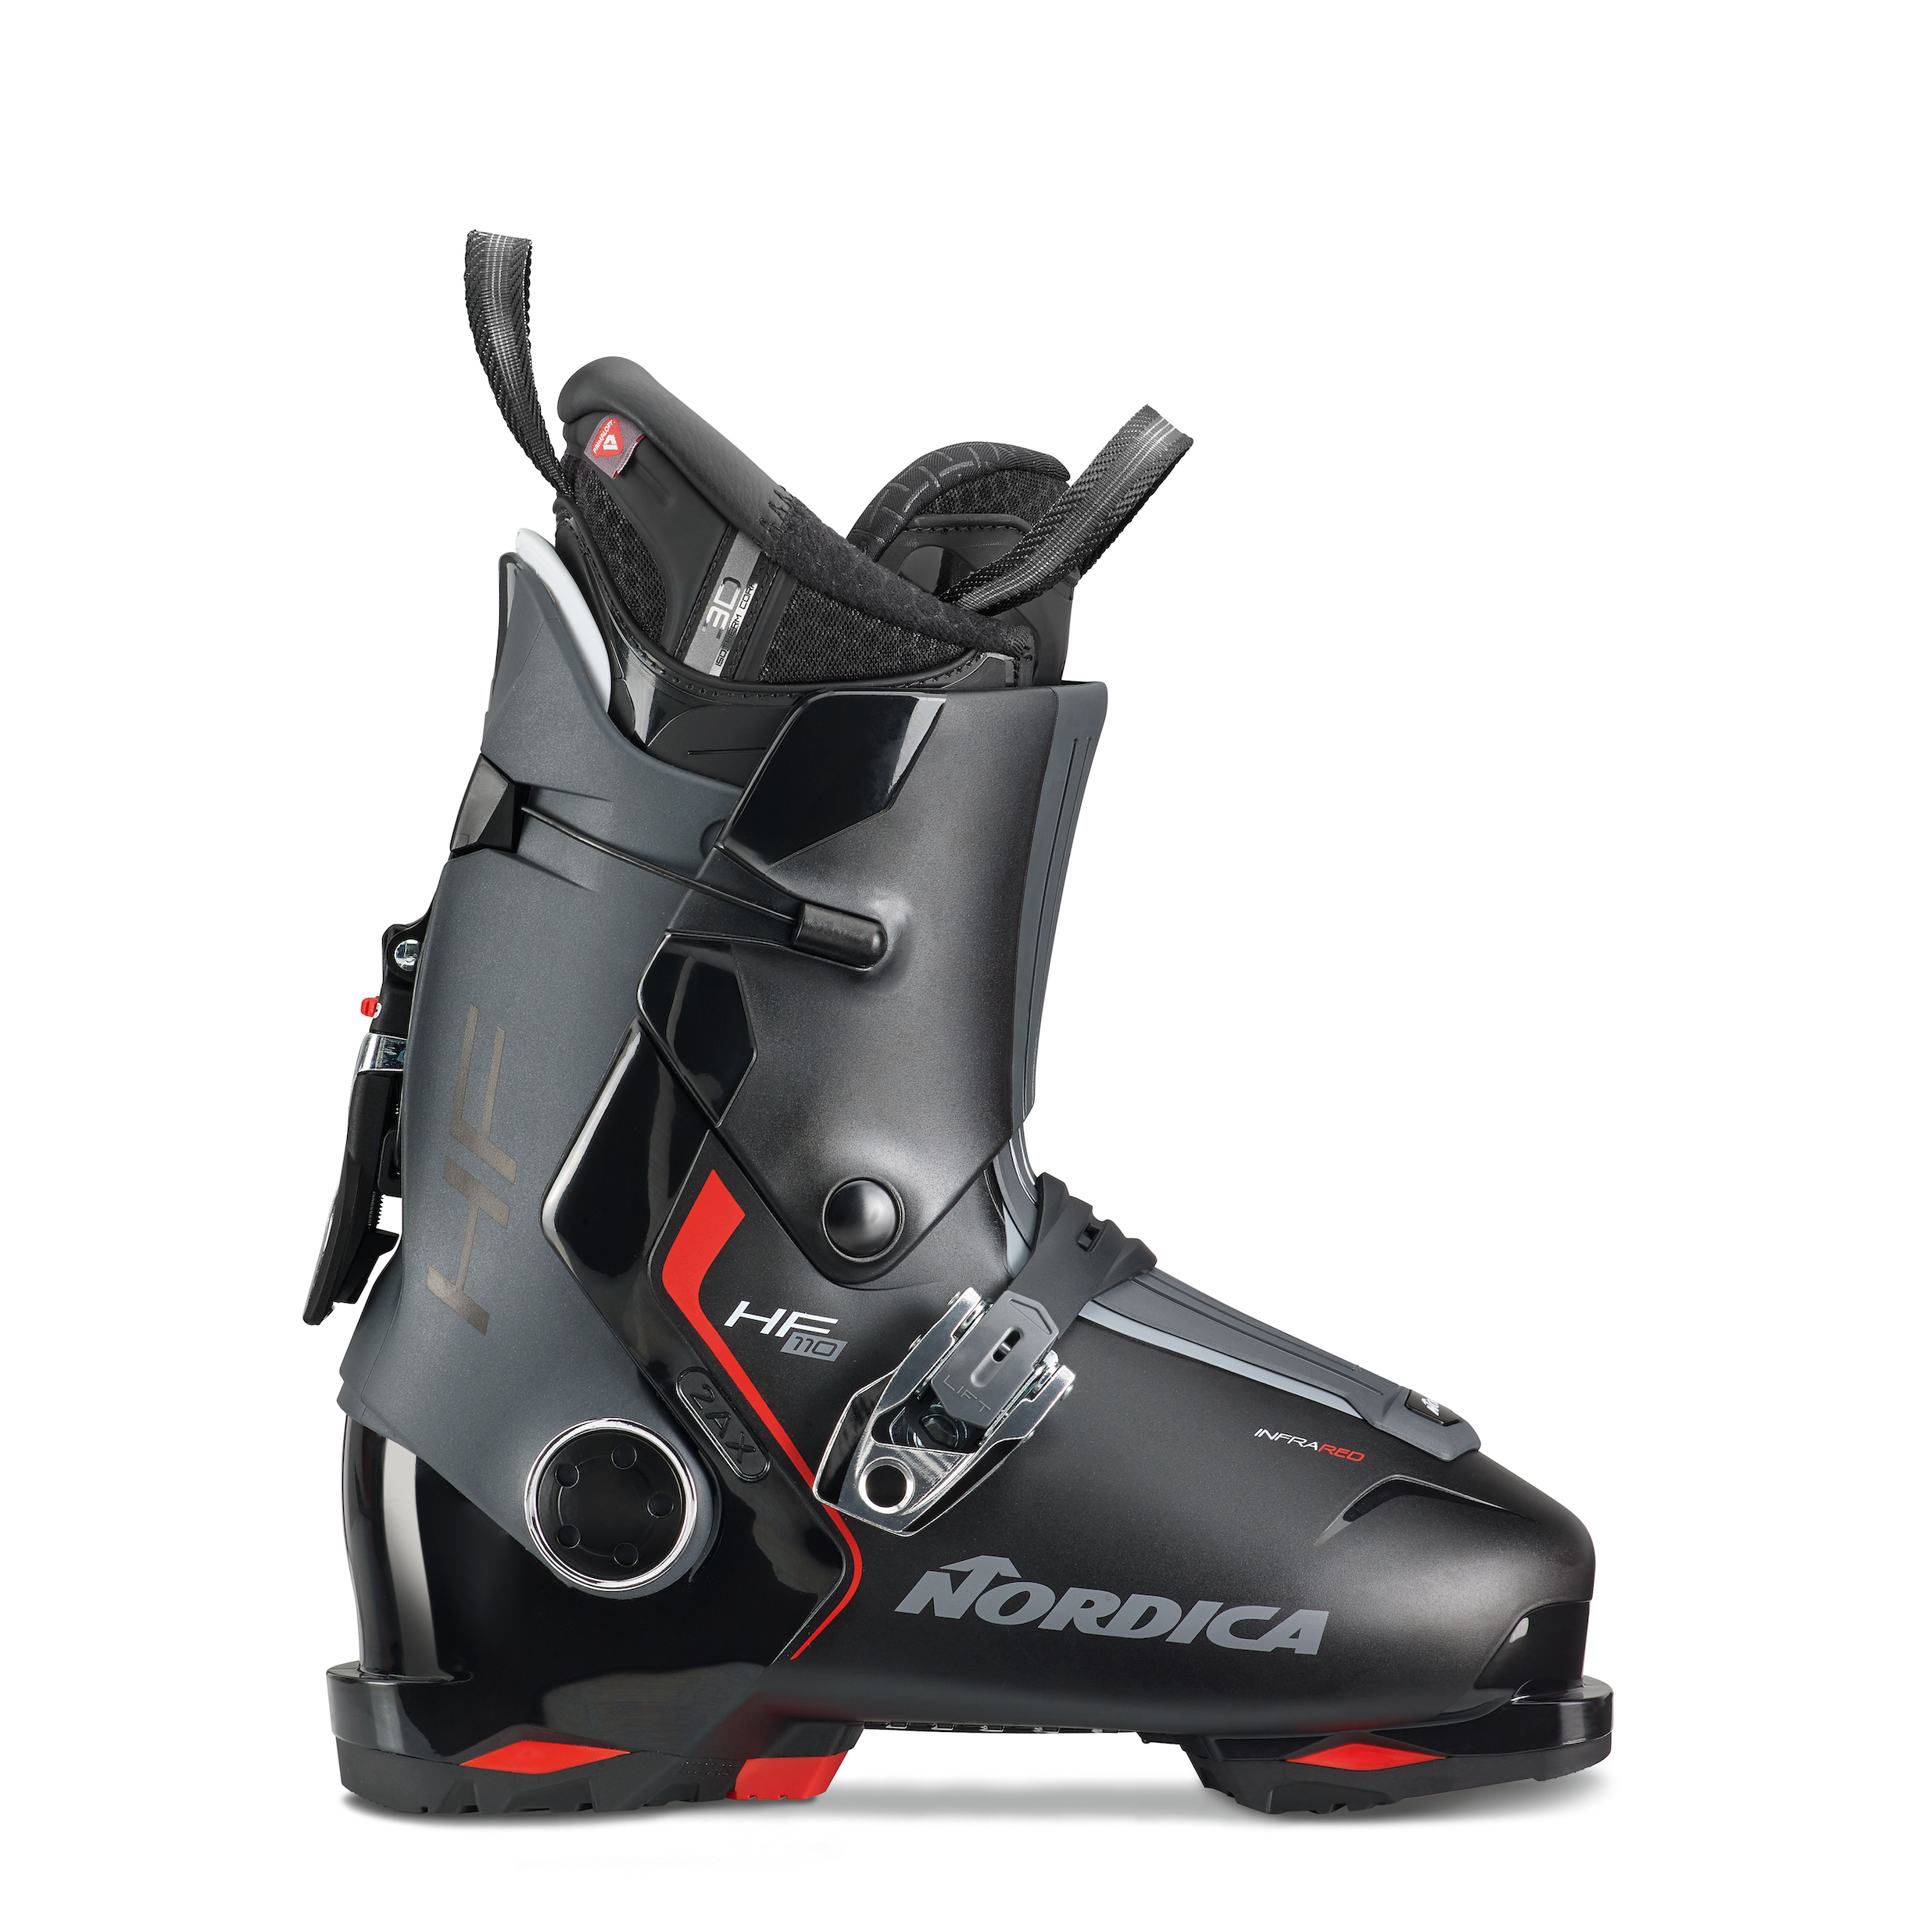 Black with red accents men's Nordica HF 110 ski boot with one lower buckle and one upper buckle.